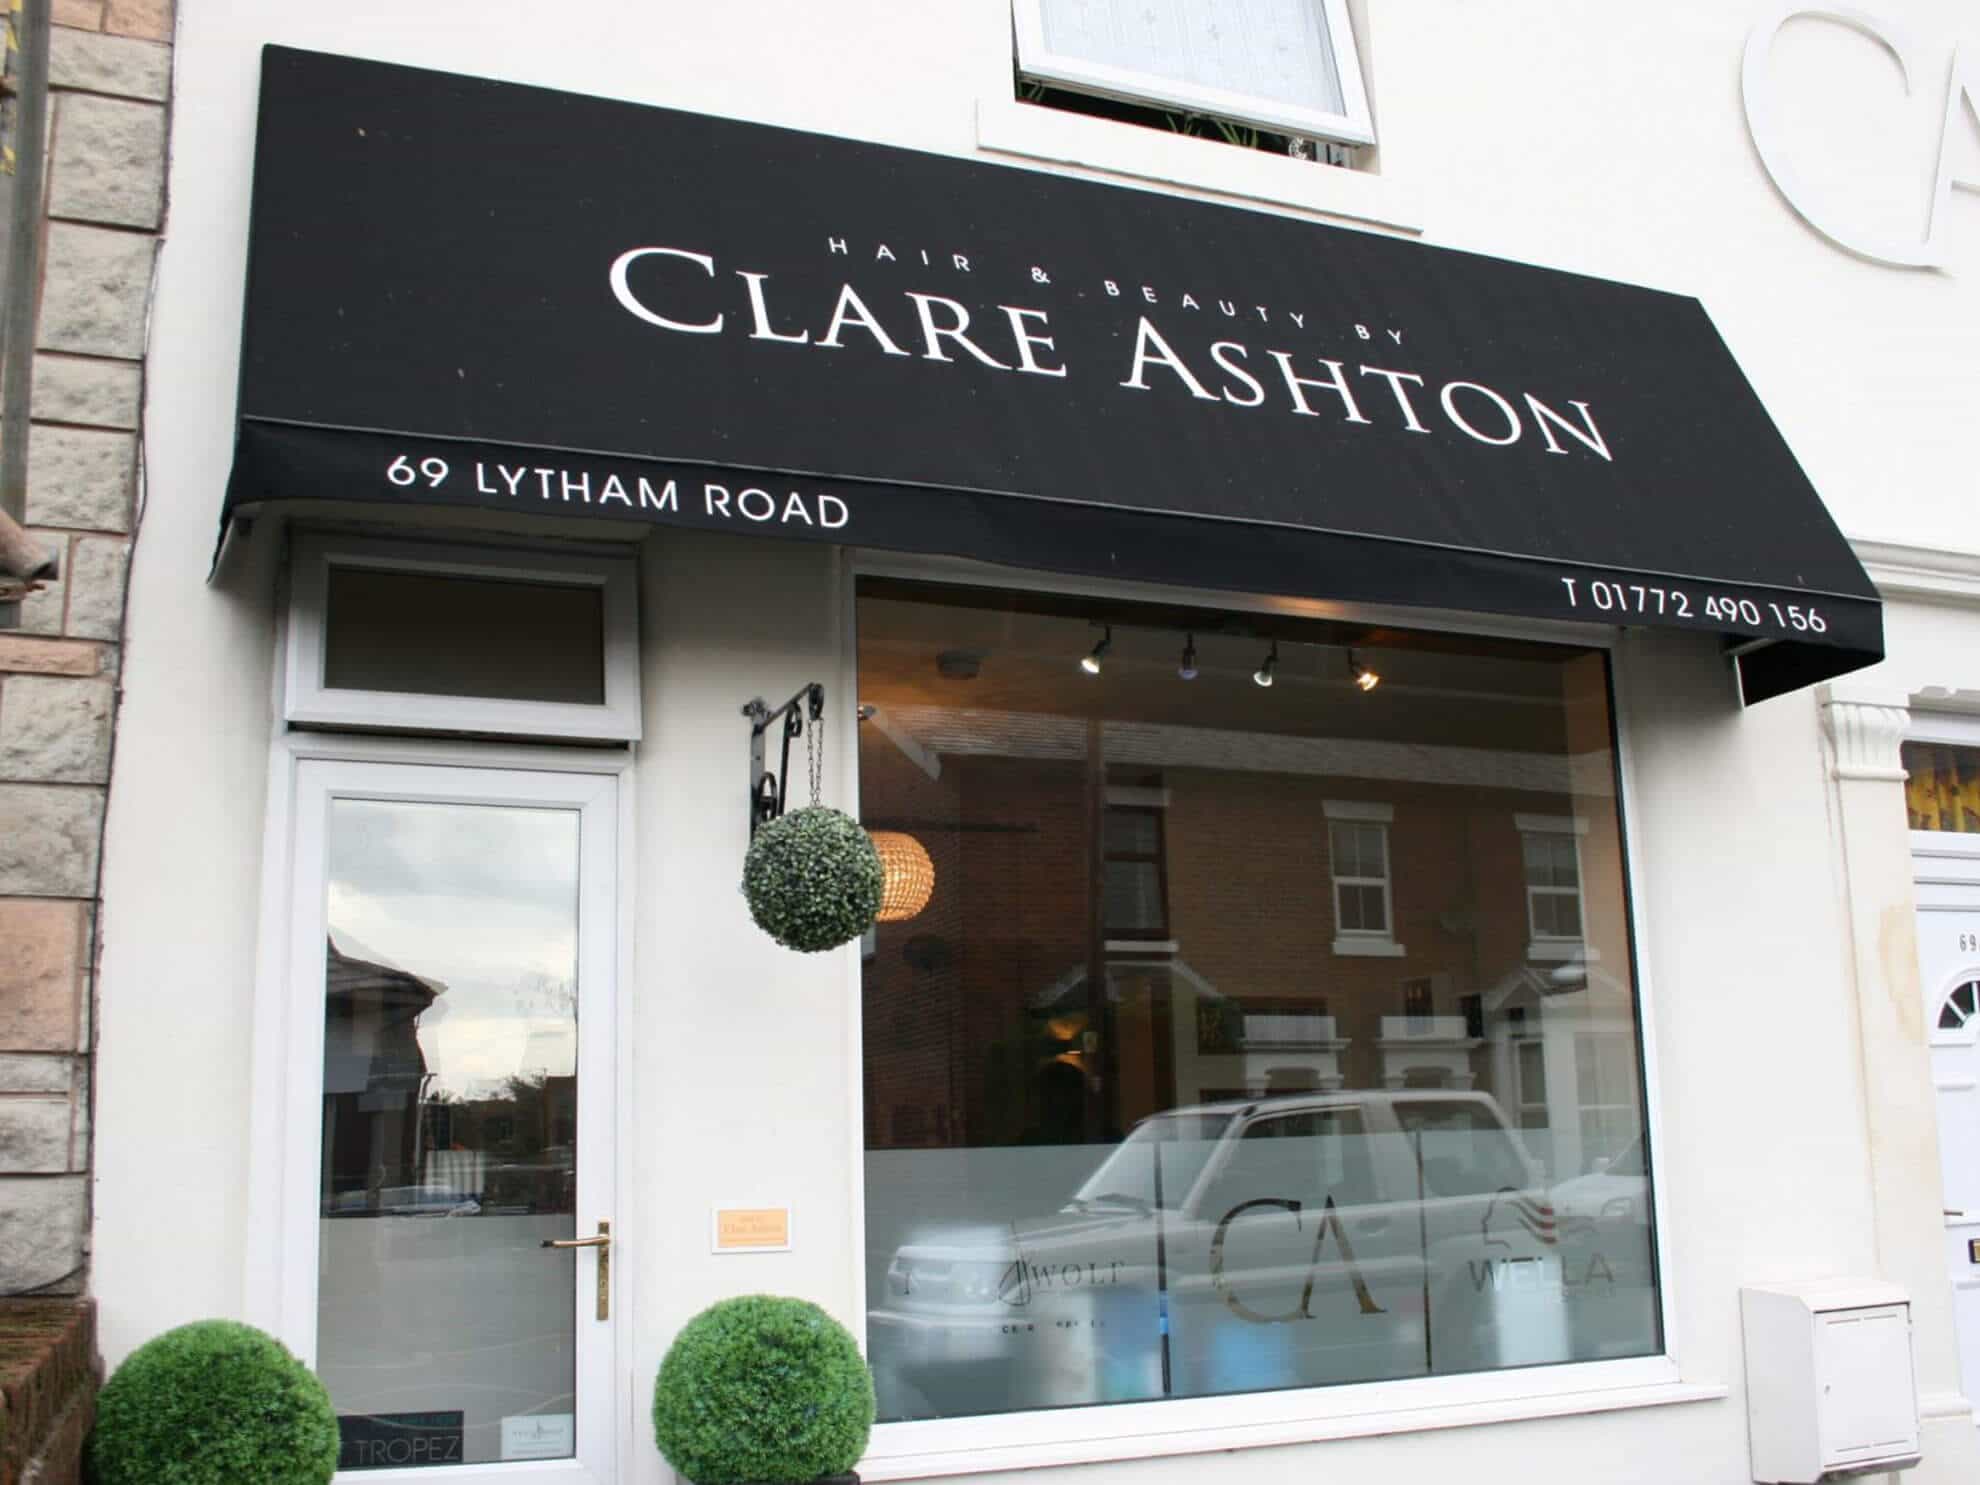 Clare Ashton hair canopy sign - Stand off acrylic letters and window graphics